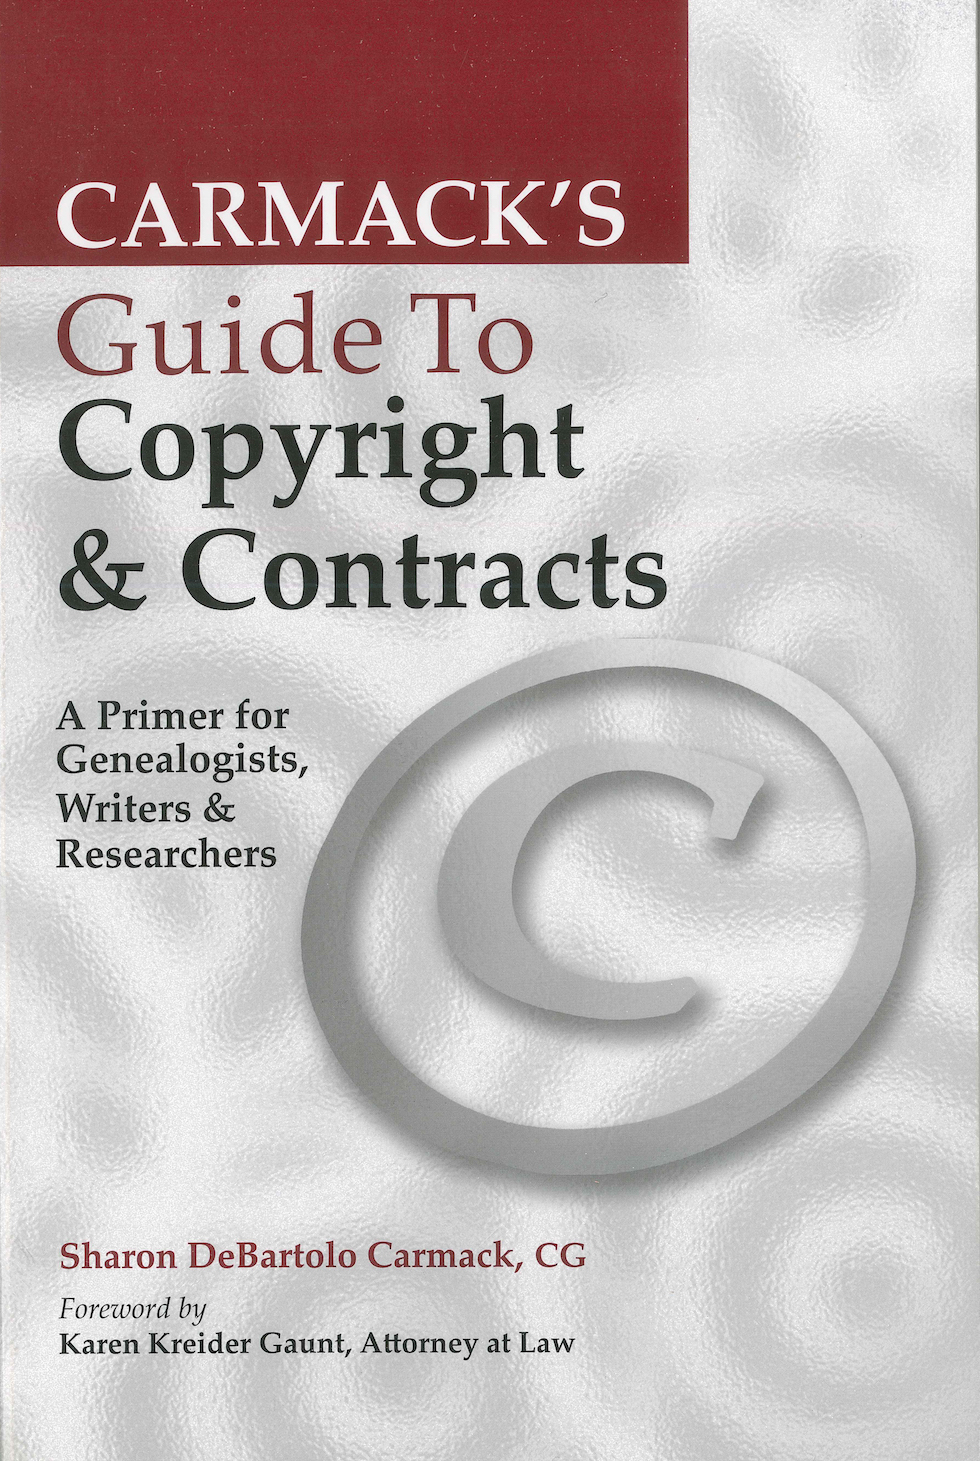 Carmack’s Guide to Copyright & Contracts: A Primer for Genealogists, Writers & Researchers